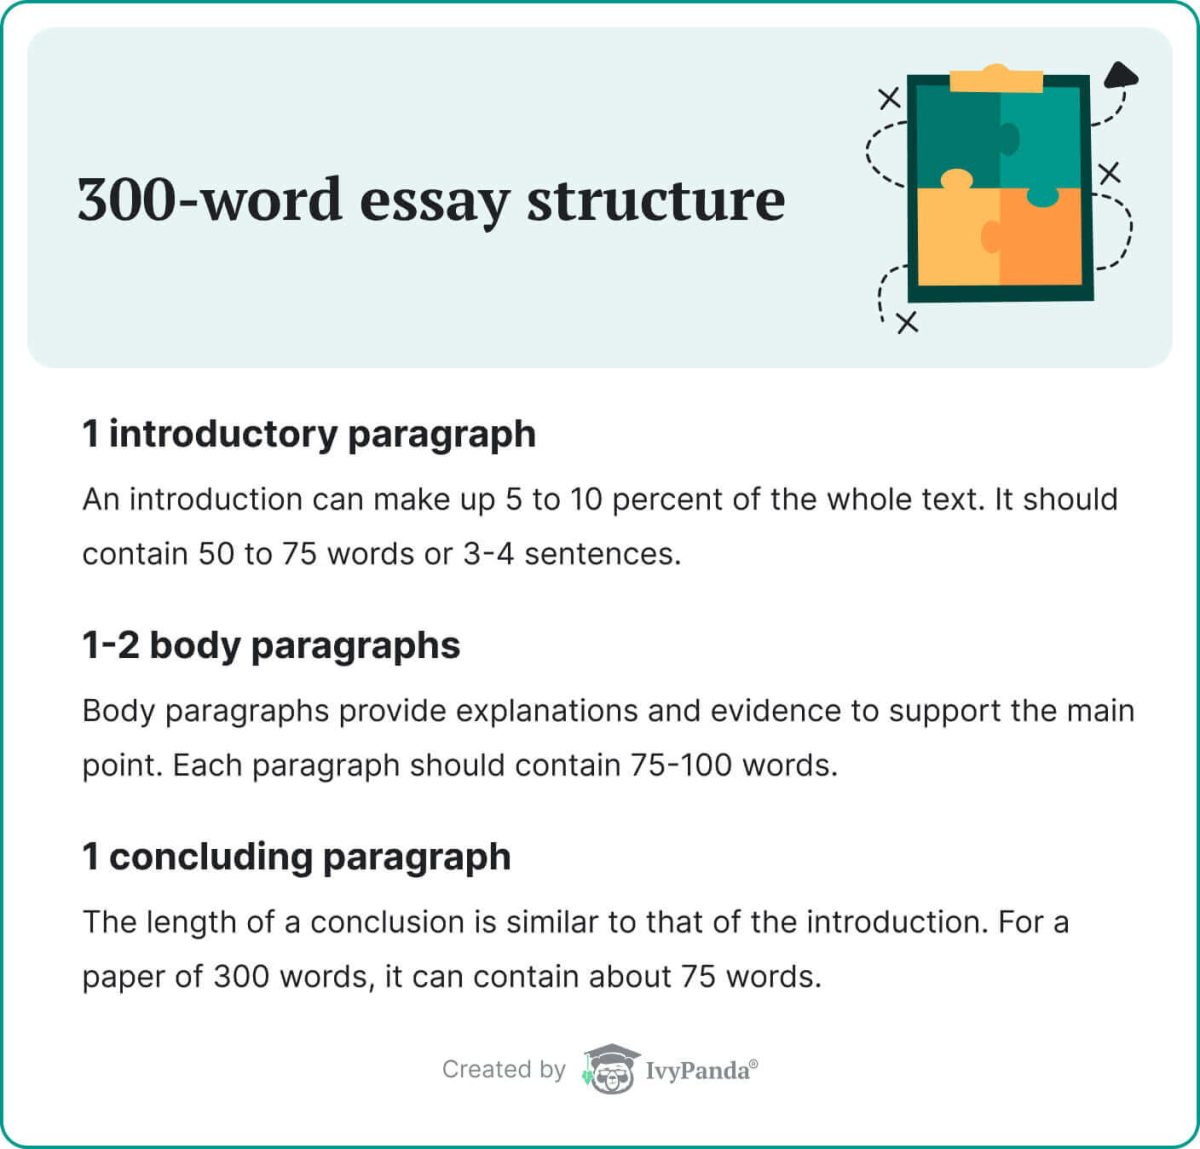 This image shows the 300-worrd essay structure.